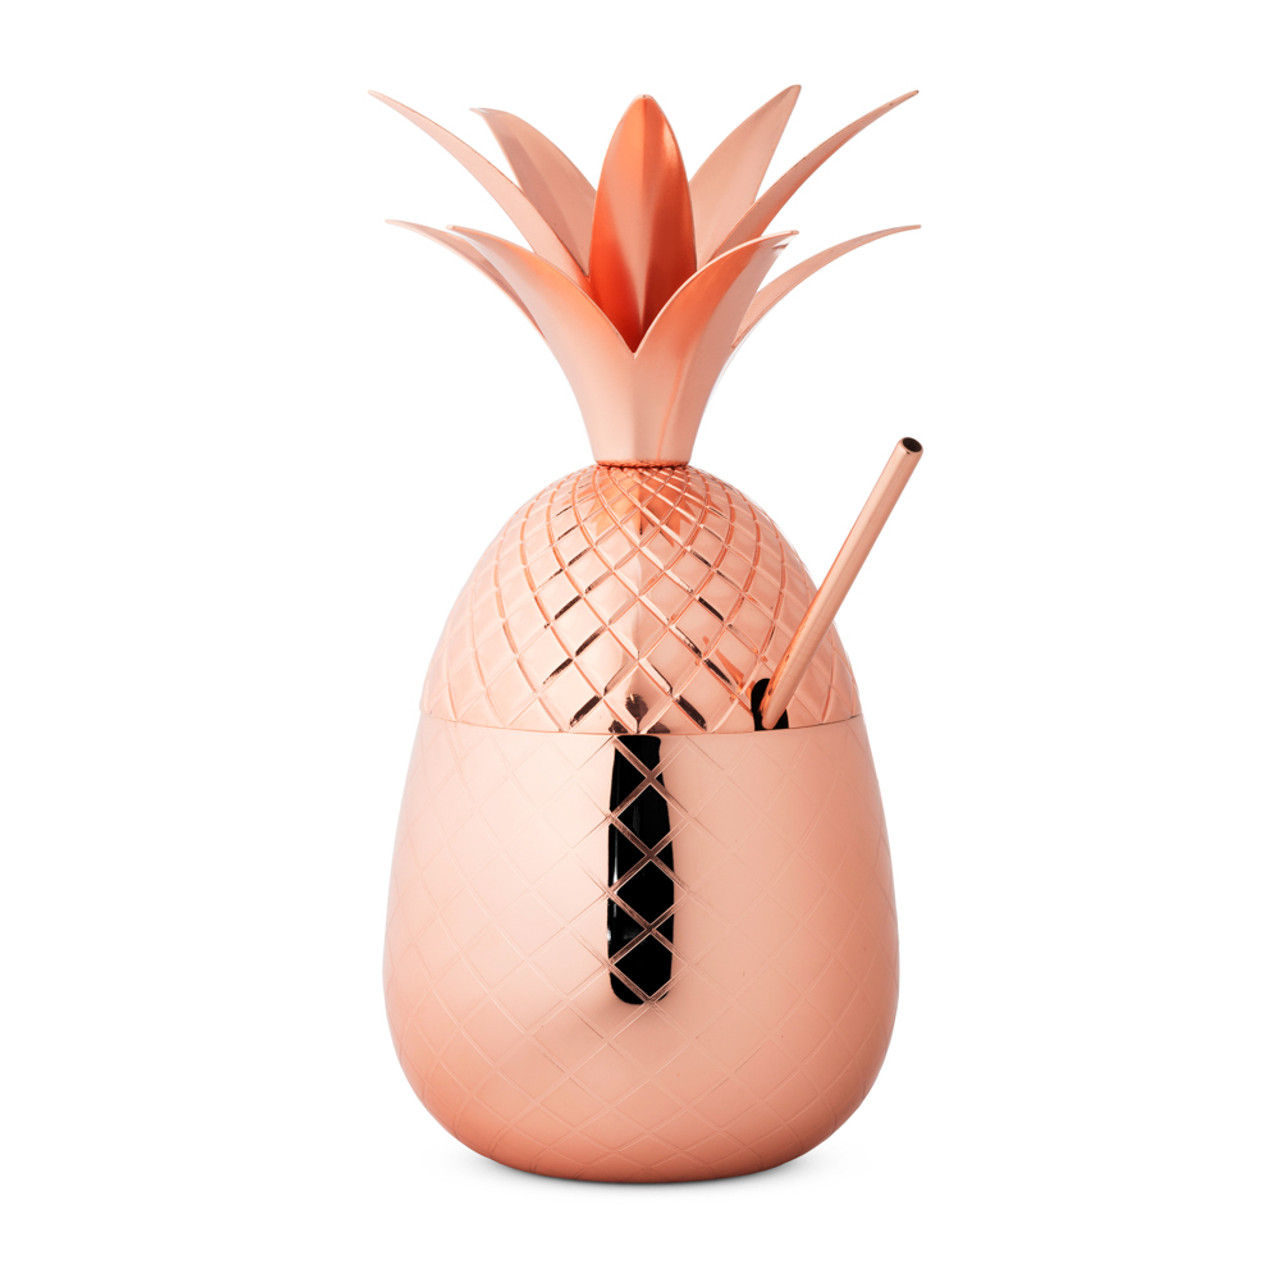 https://cdn11.bigcommerce.com/s-cznxq08r7/images/stencil/1280x1280/products/5382/14864/MUGS0010-CP_Pineapple_Cocktail_Tumbler_-_30_oz_-_Copper_Plated_Stainless_Steel_01__44323.1670872627.jpg?c=1